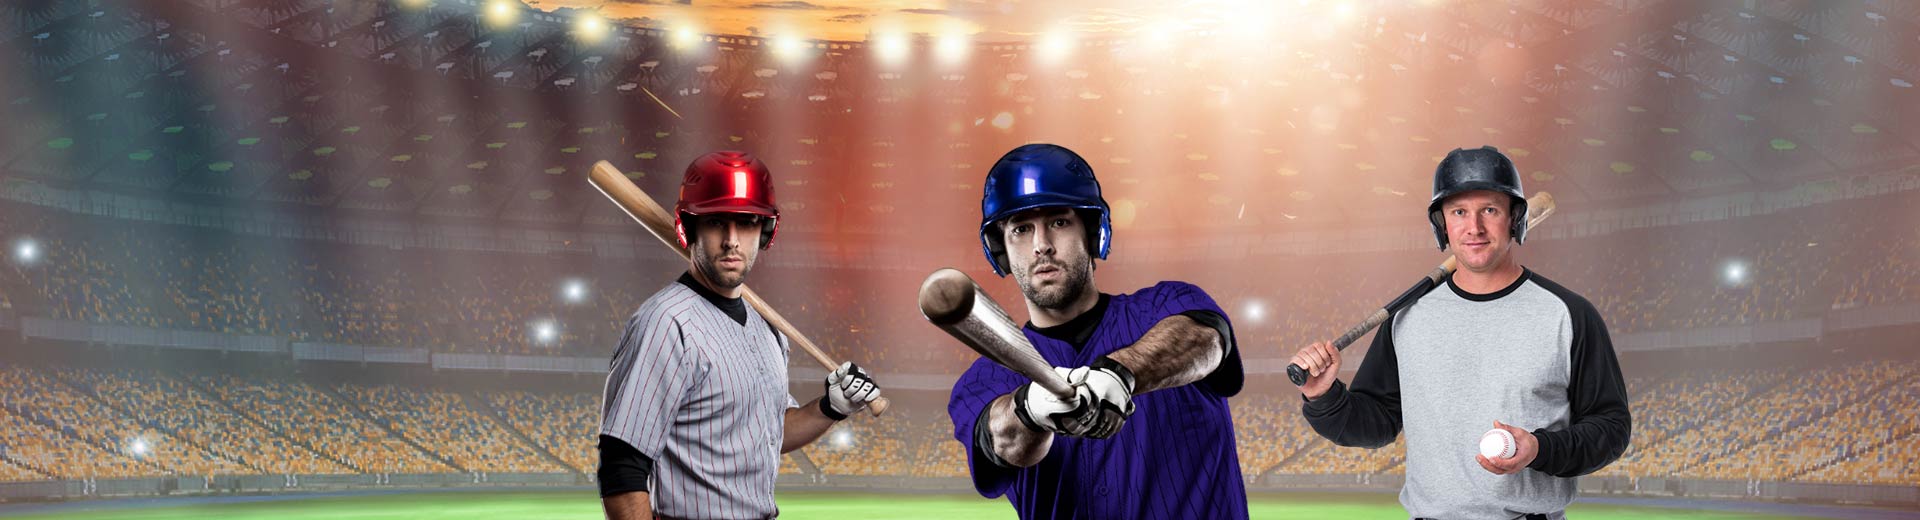 Baseball Shirts Manufacturers in Portugal